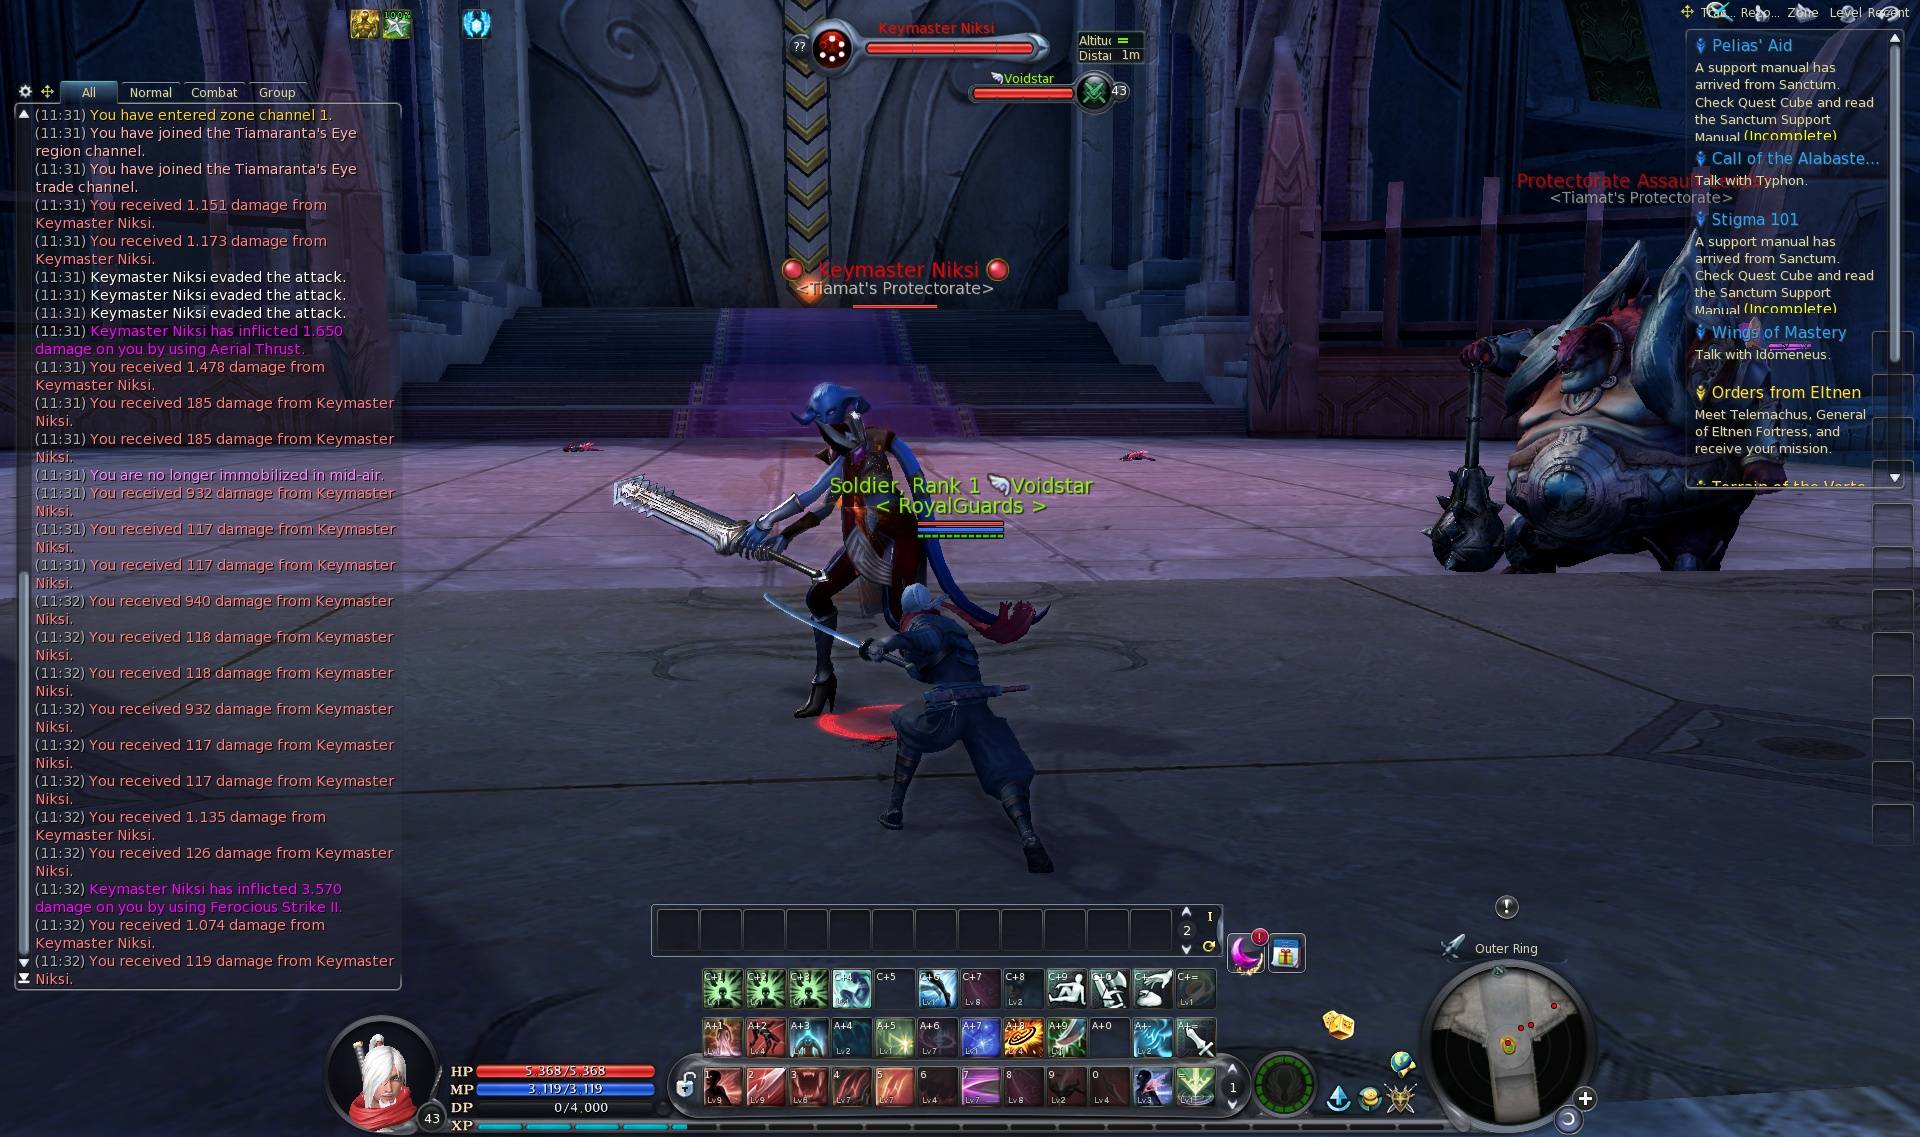 Aion0010 - What's your favorite version of Aion to play, and why? - RaGEZONE Forums